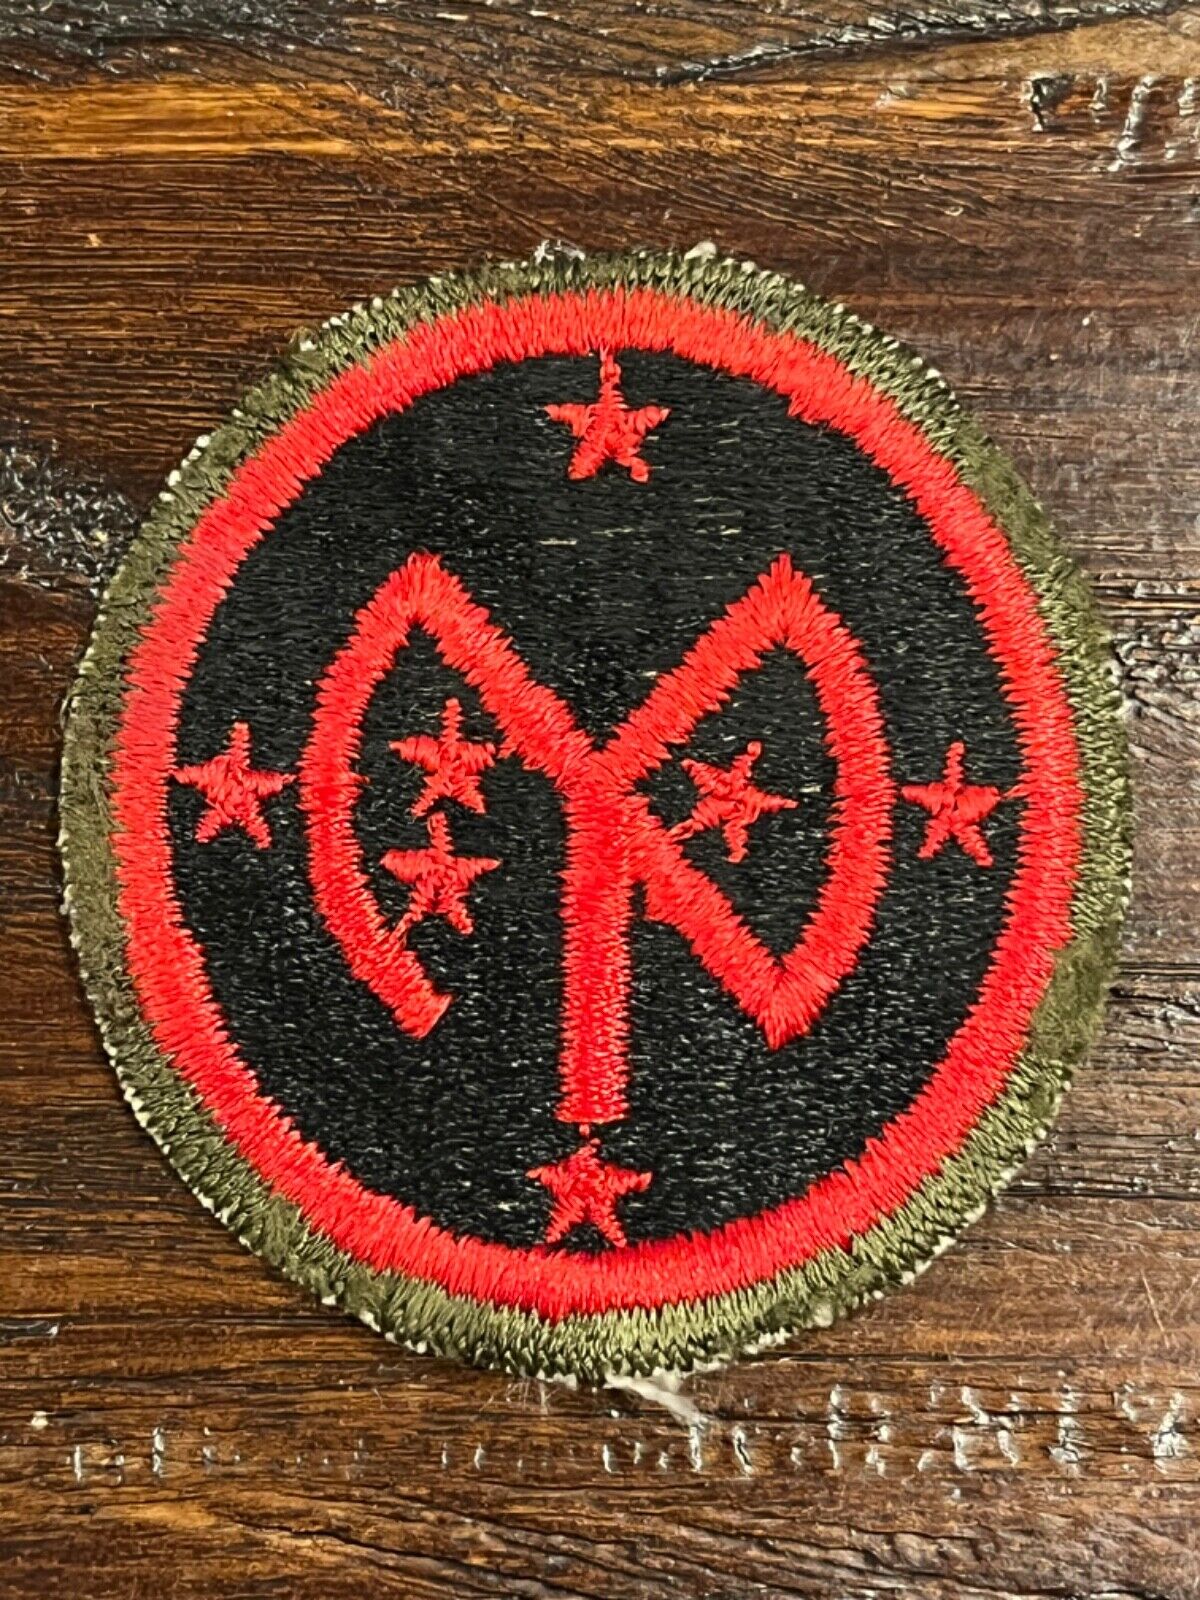 WWII WW2 US ARMY 27TH INFANTRY DIVISION PATCH W/OD BORDER